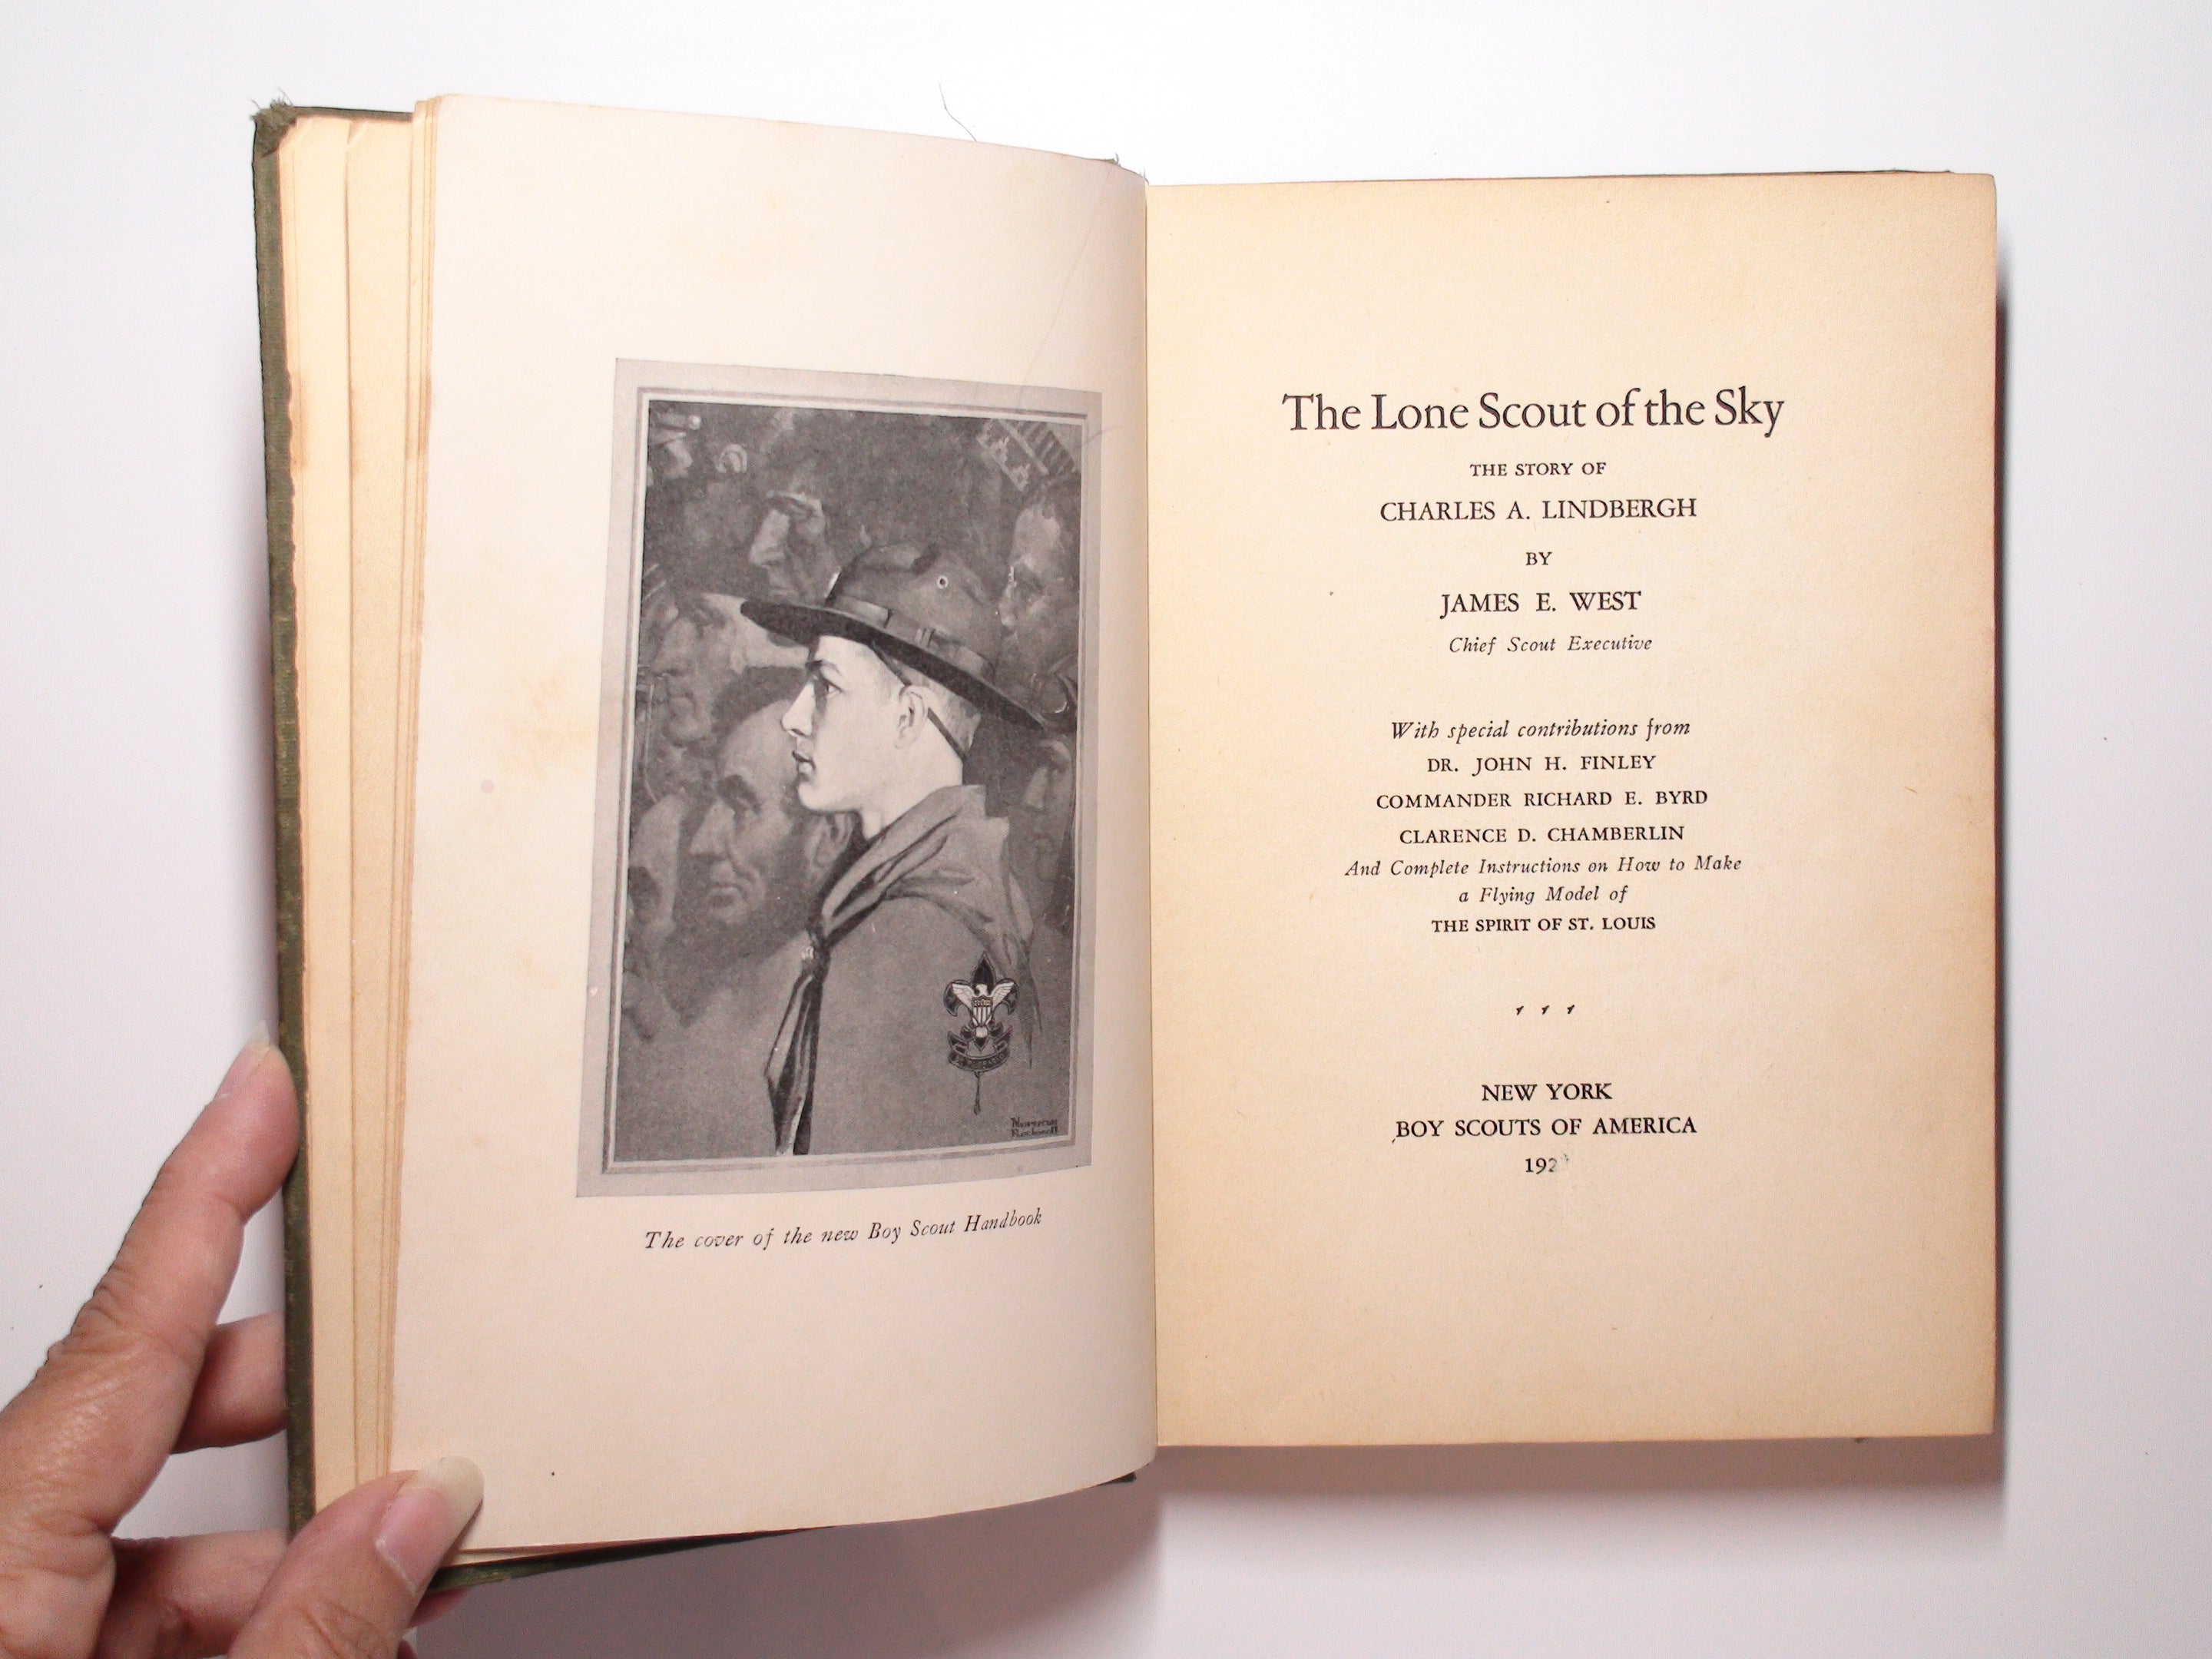 The Lone Scout of the Sky, Story of Charles Lindbergh, James E. West, 1st Ed, 1927